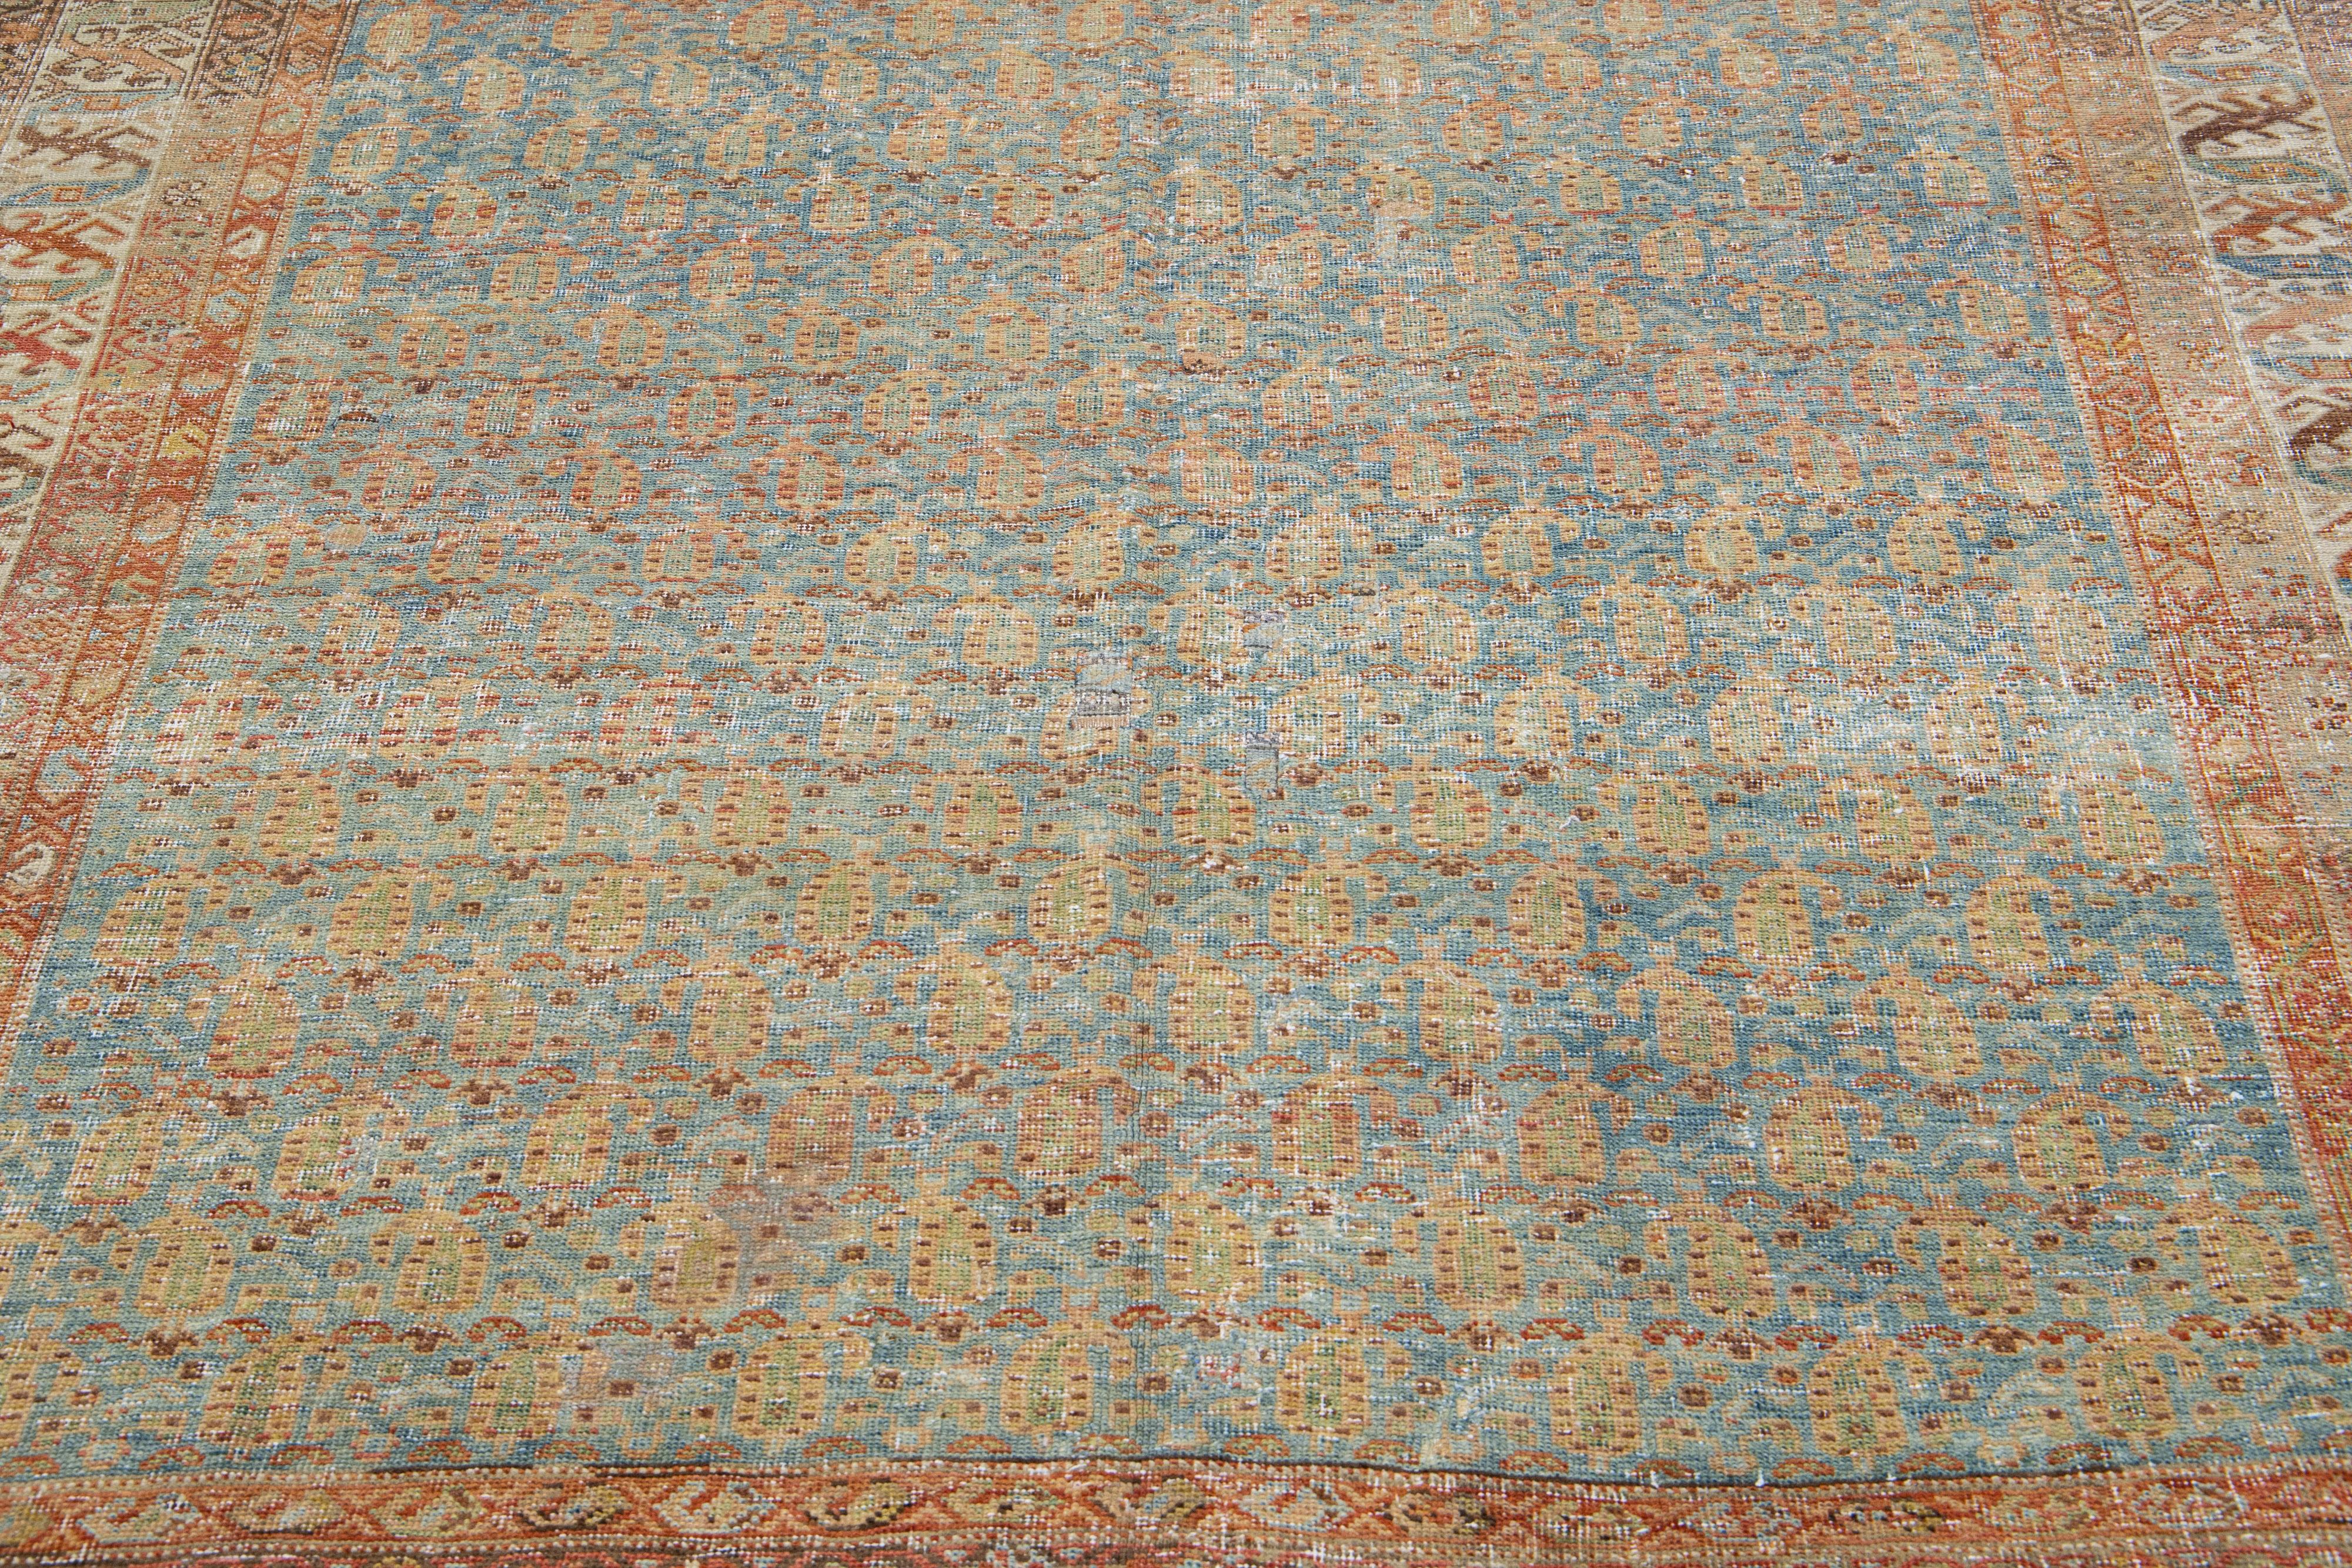 Beautiful antique Malayer hand-knotted wool rug with a blue color field. This Persian rug has orange-rust, brown, and green accents in a gorgeous traditional floral design.

This rug measures: 5'11